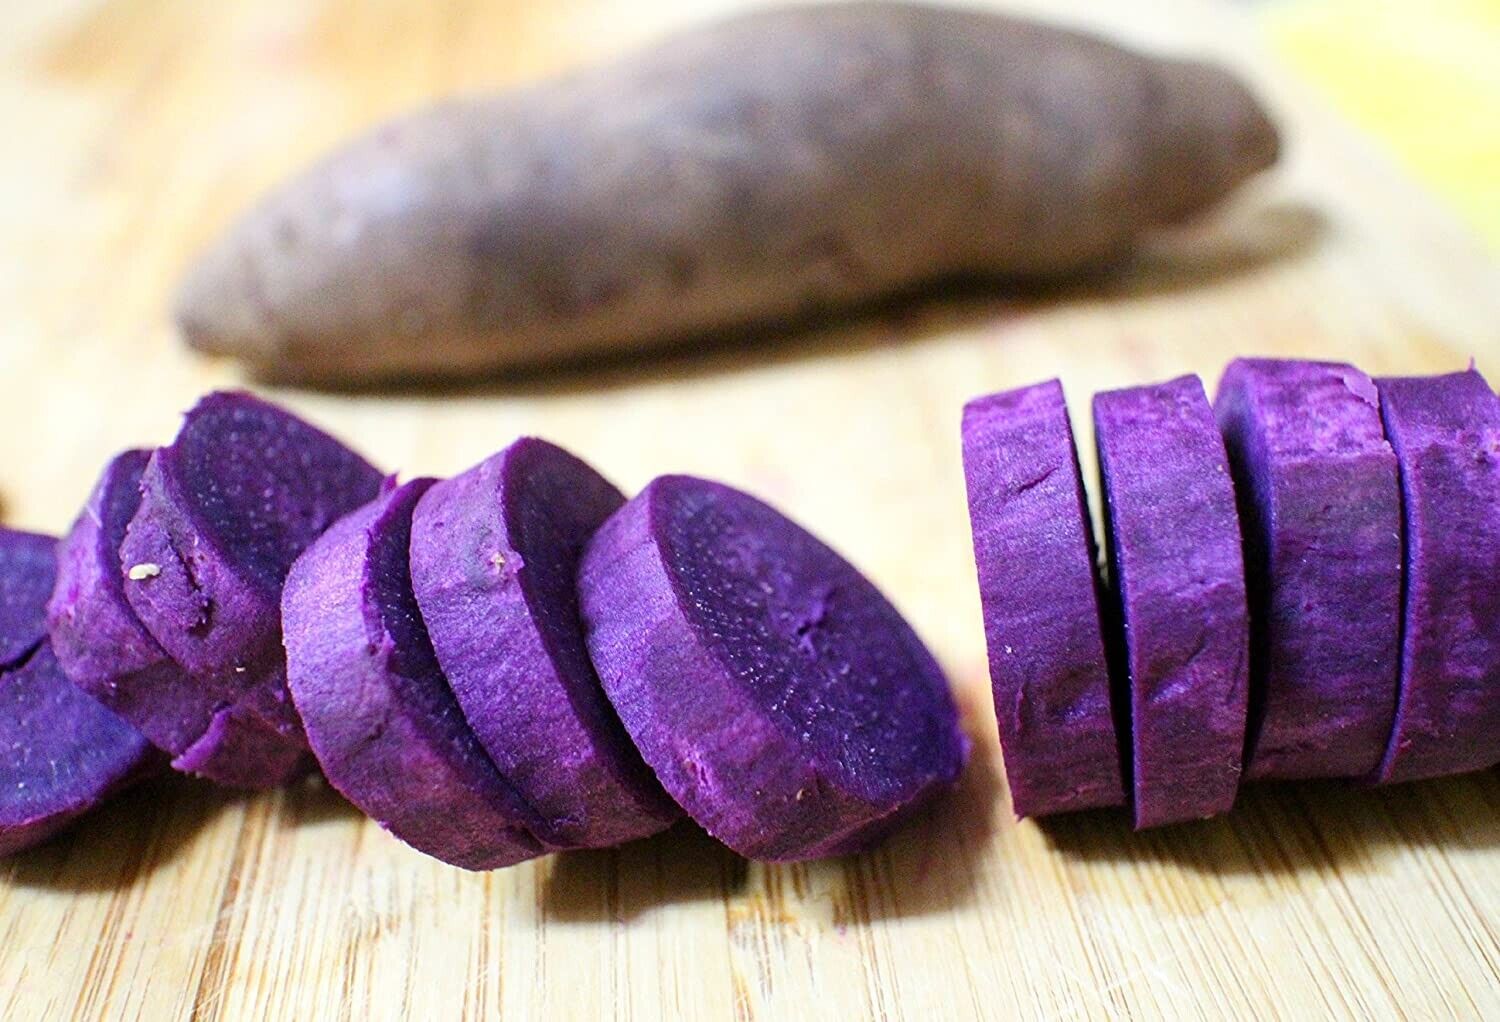 Japanese Purple Sweet Potato (1 LB)Excellent yields and flavor. Stores well Acti